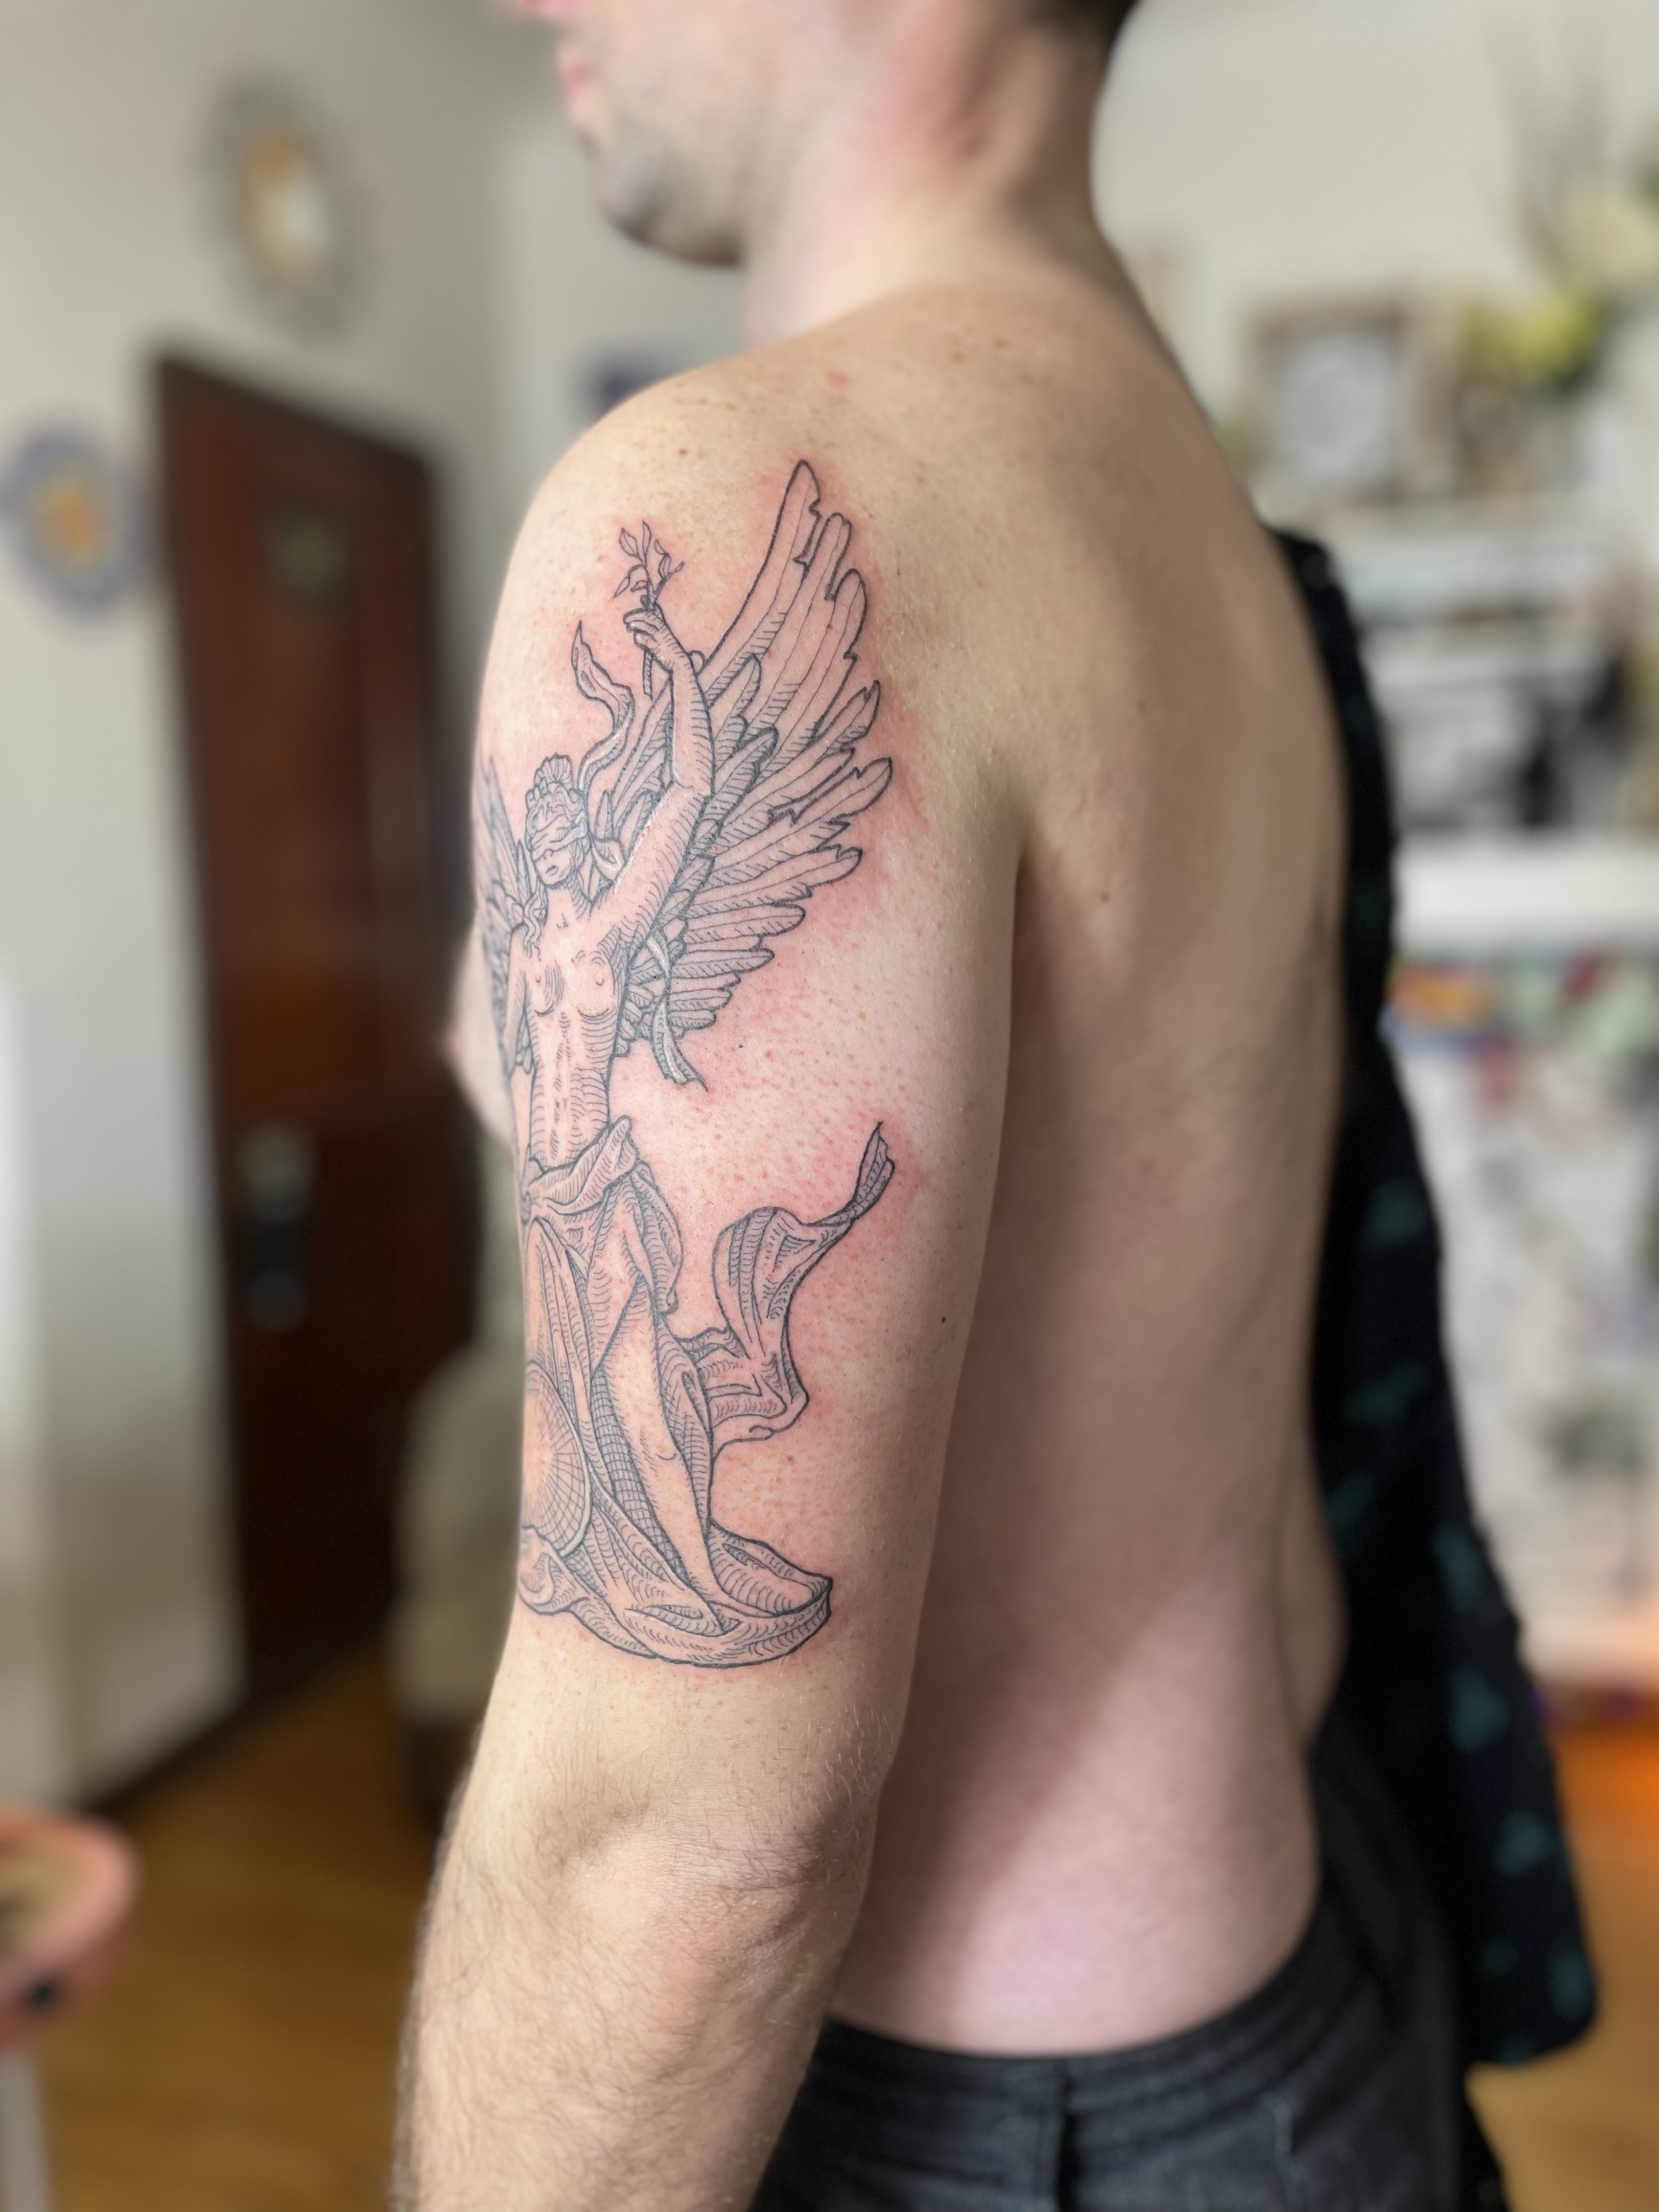 Icarus nice and fresh  Led Zeppelin tattoo February 25 2  Flickr